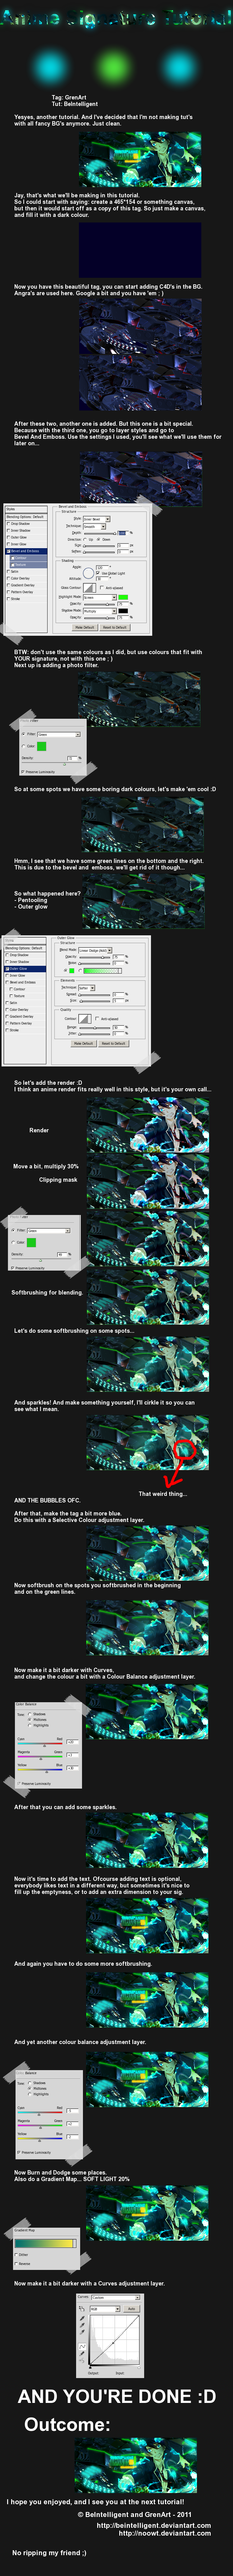 anime_signature_tutorial_by_beintelligent-d4bh6ye.png